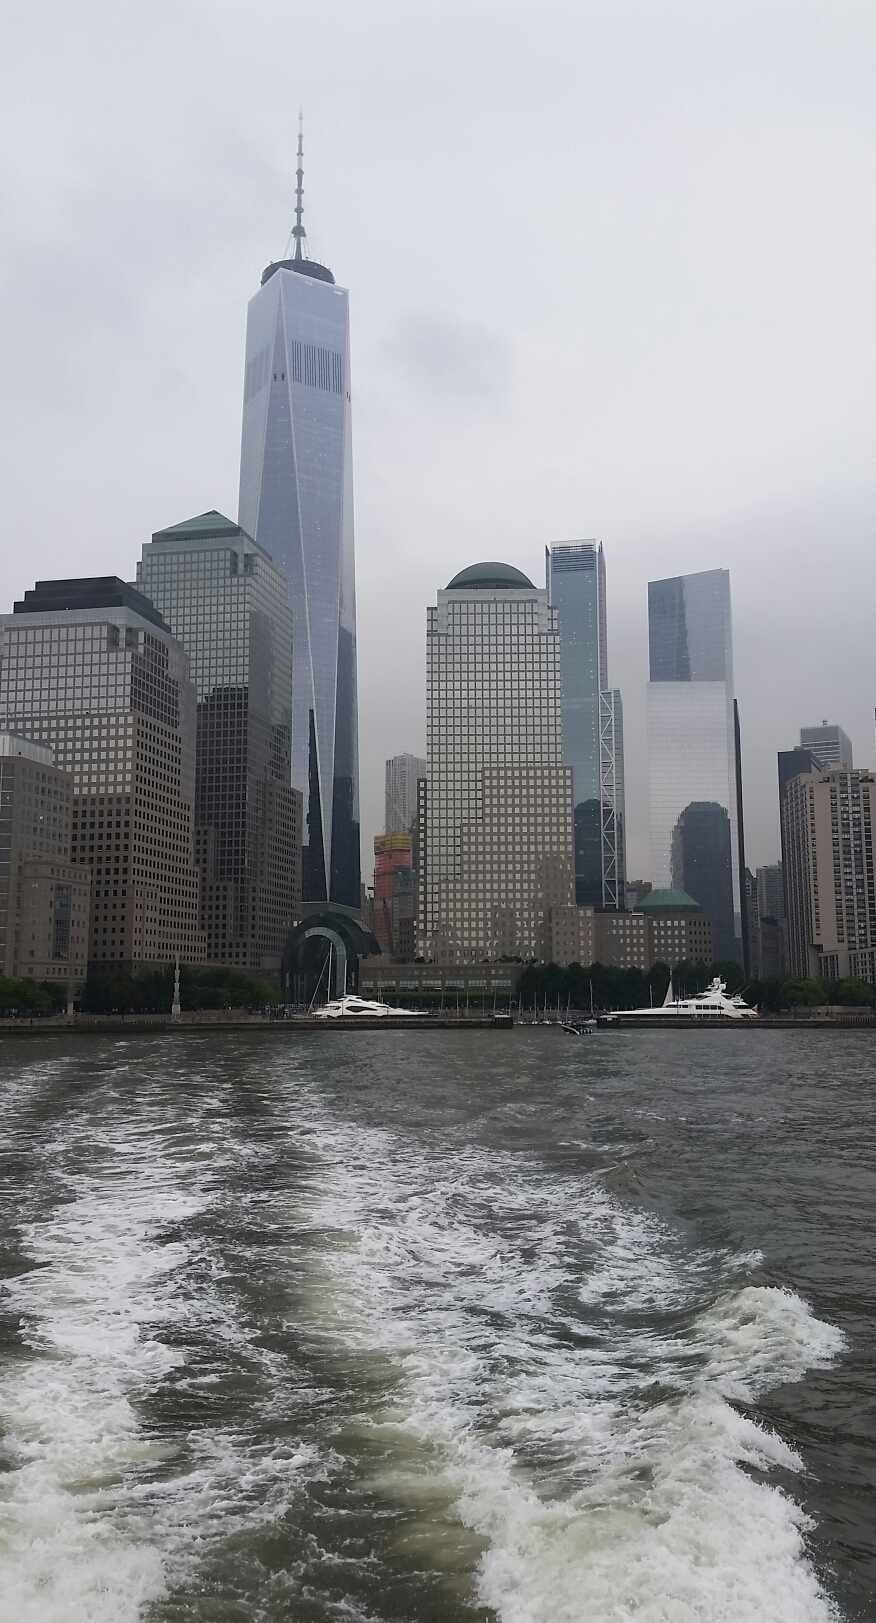 One world trade center, Brookfield place, battery Park City, ferry to New Jersey